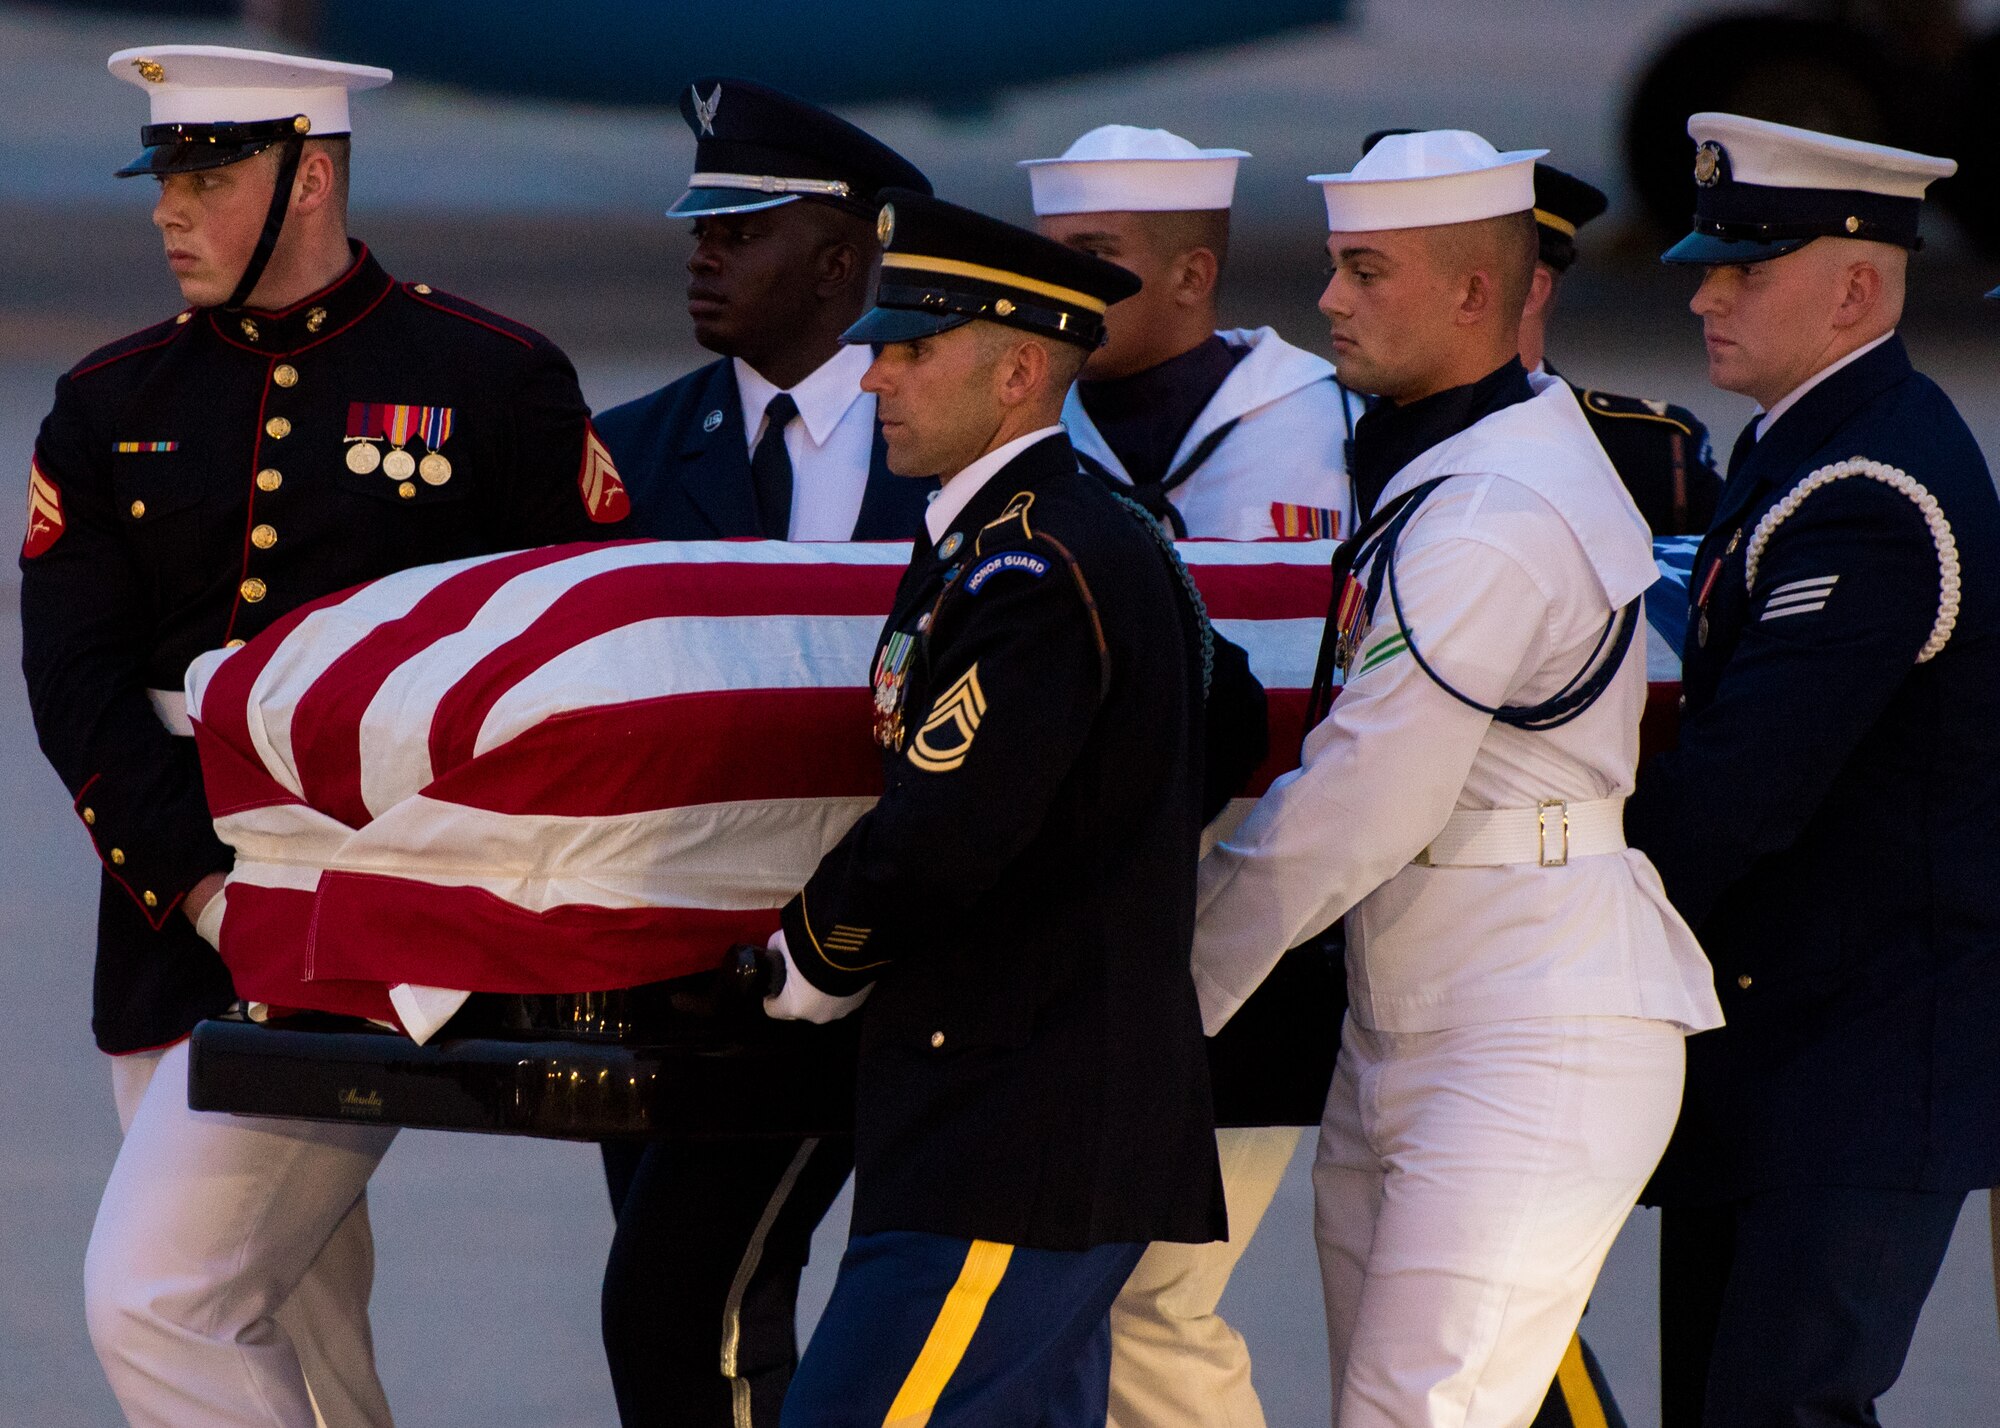 A Joint Service Arrival Team carry the flag-draped casket of Sen. John McCain at Joint Base Andrews, Md., Aug. 30, 2018. The former senator’s remains are en route to lie in state in the U.S. Capitol Rotunda. (U.S. Air Force photo by Airman 1st Class Jalene Brooks)